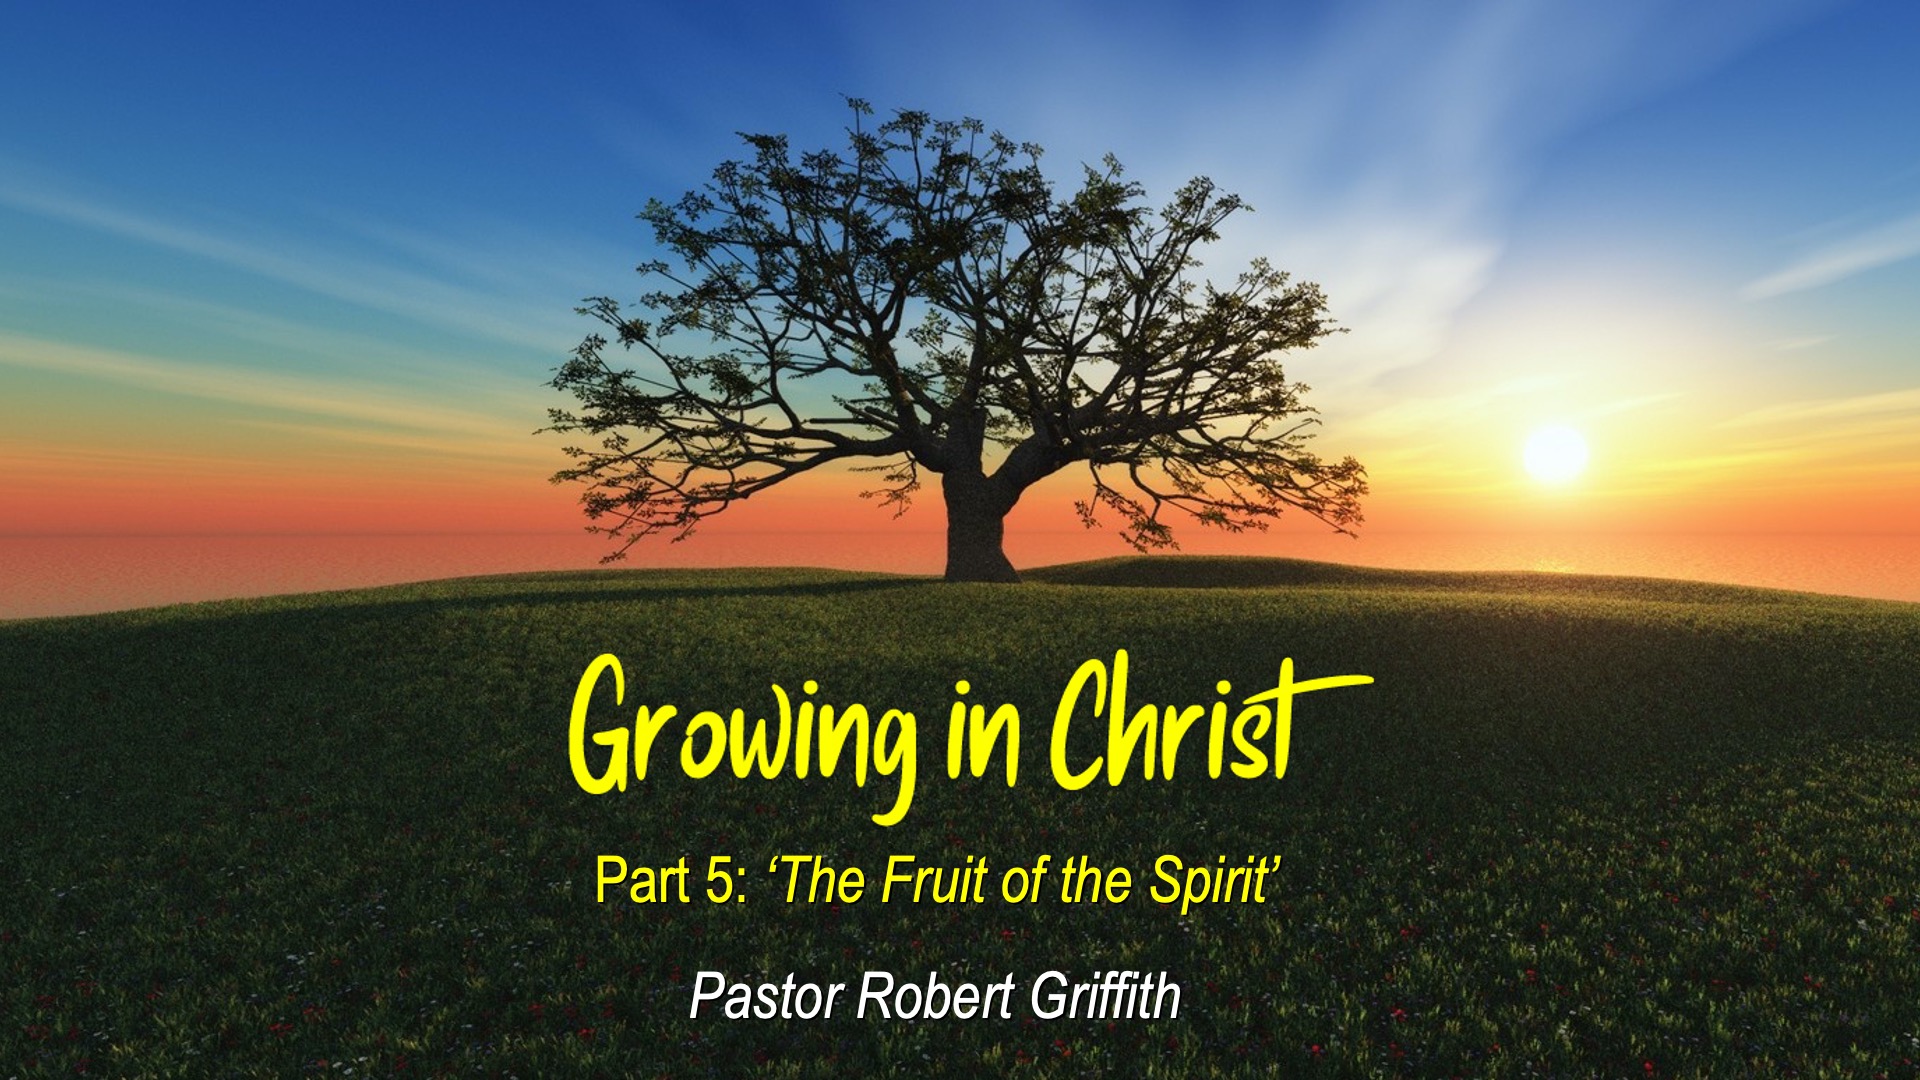 Growing in Christ (5)”The Fruit of the Spirit”